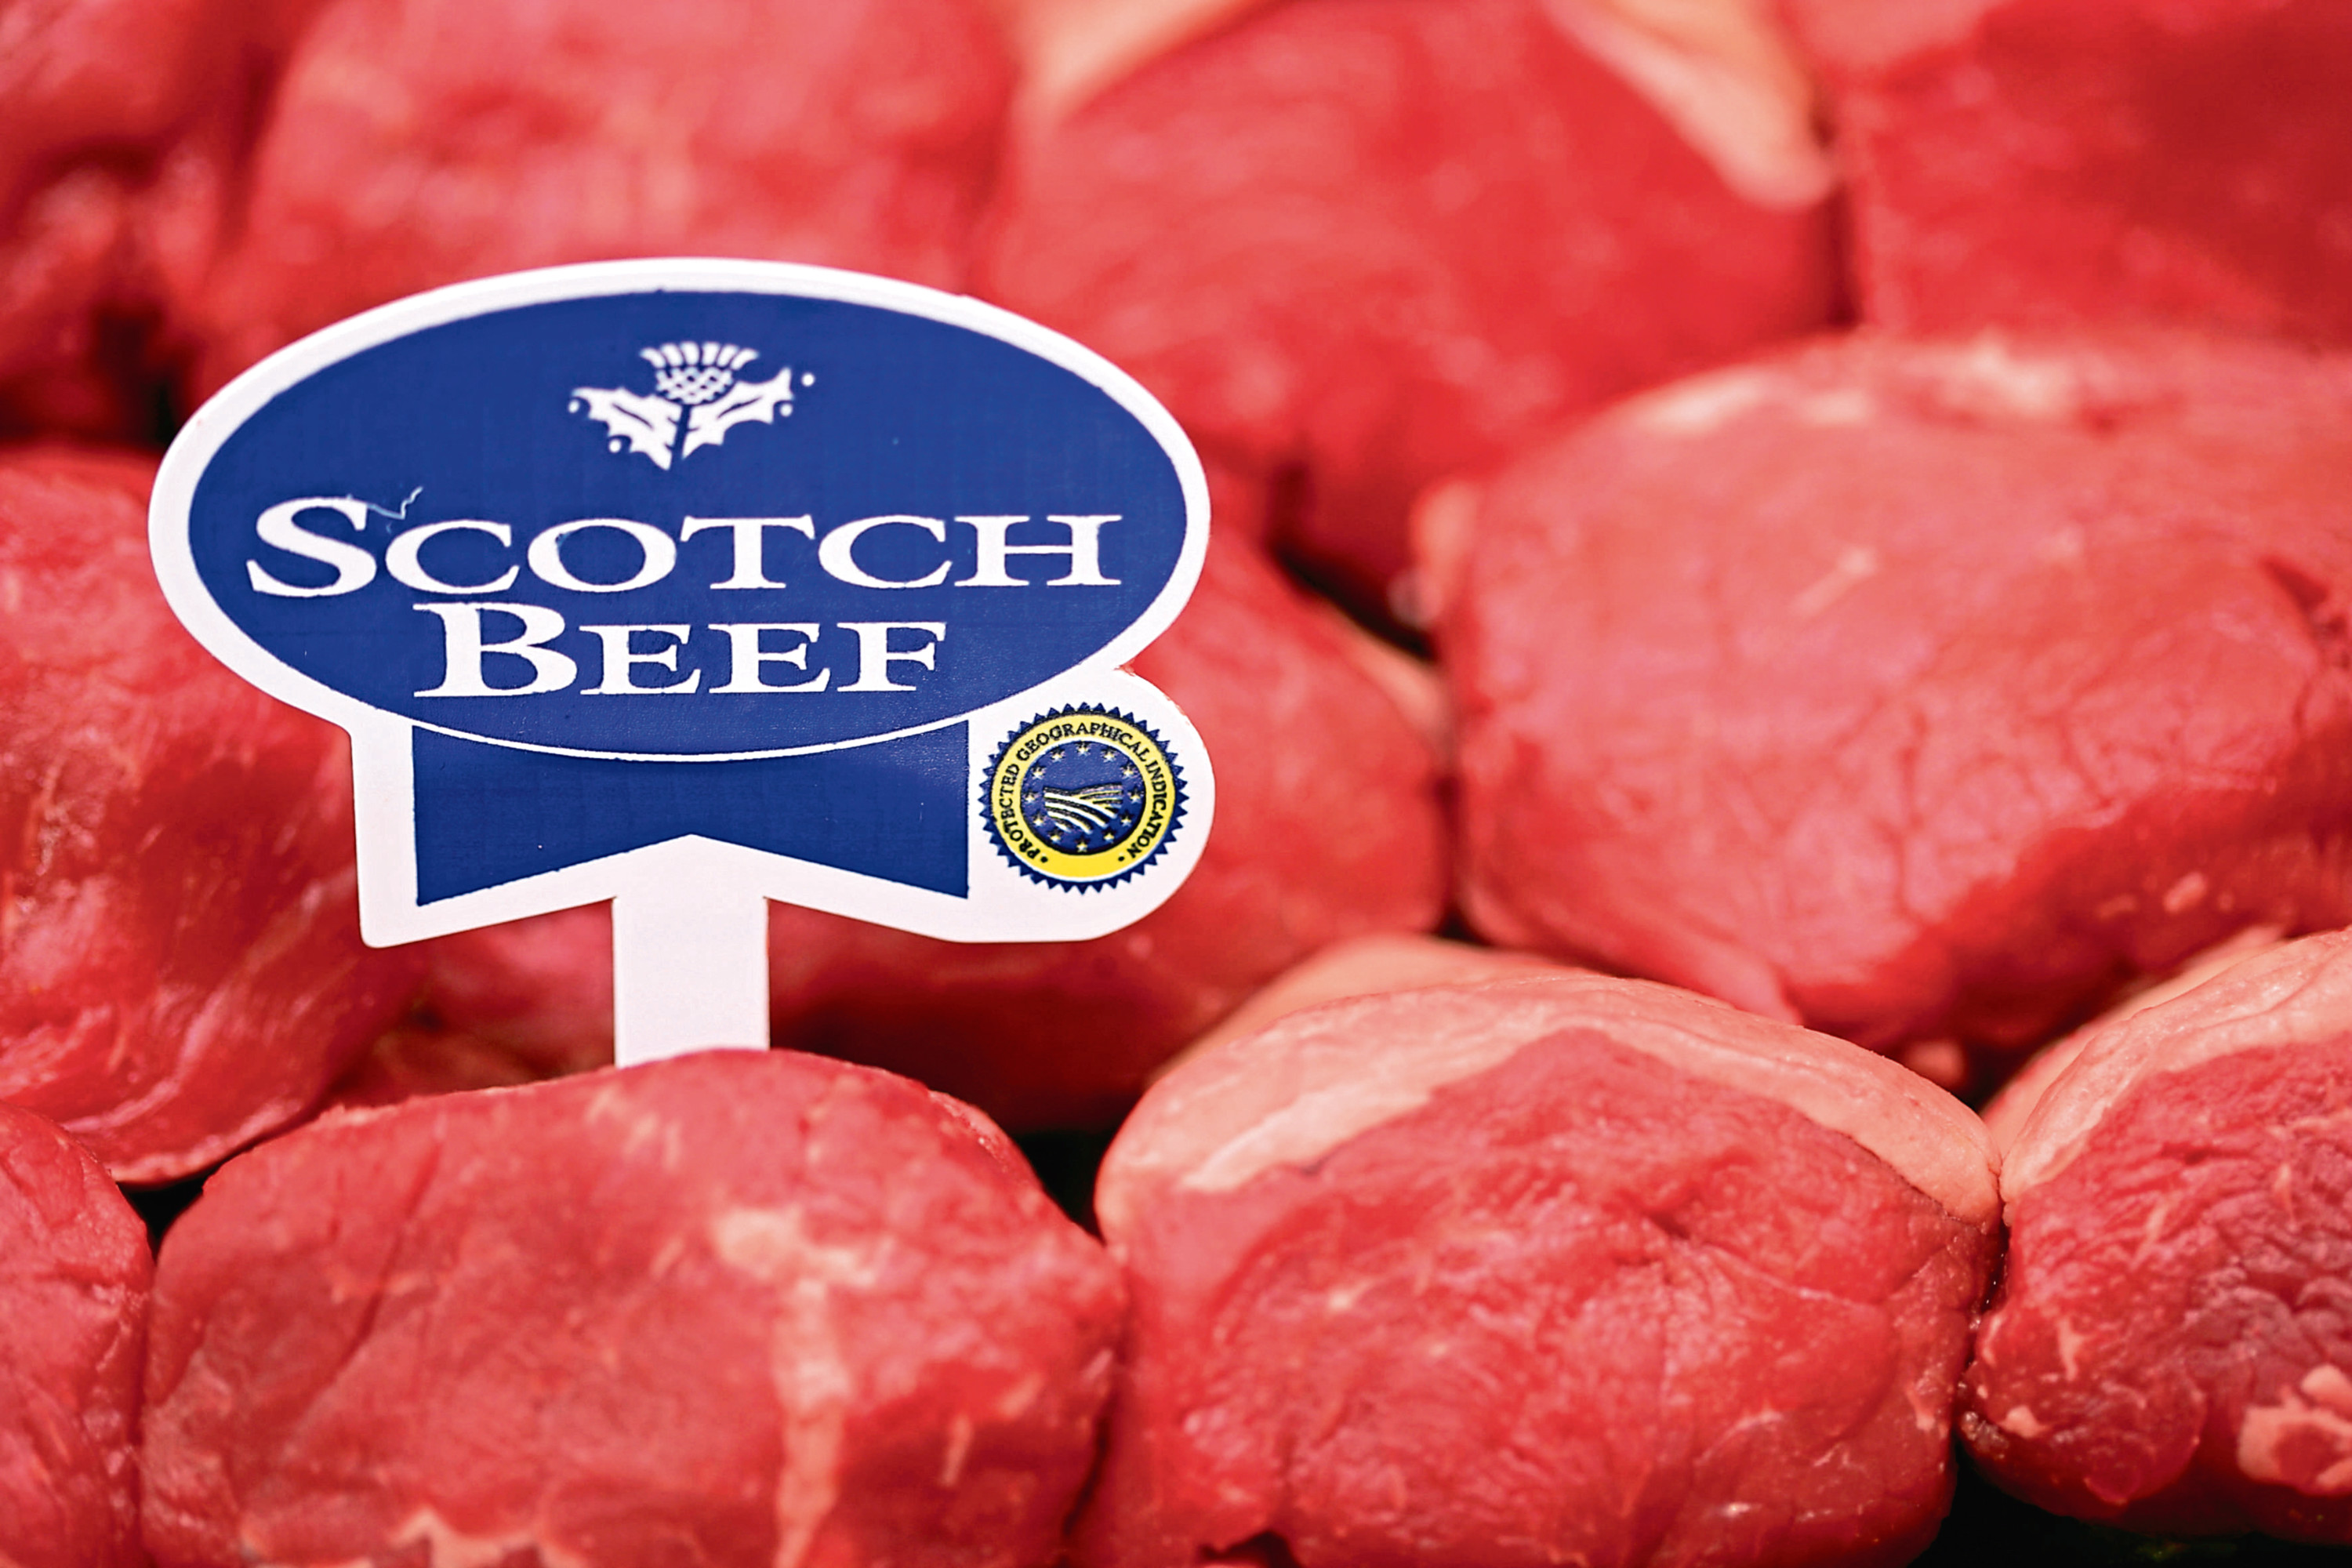 It’s hoped the #BackScotchBeef campaign will help the hard-hit meat industry in Scotland.